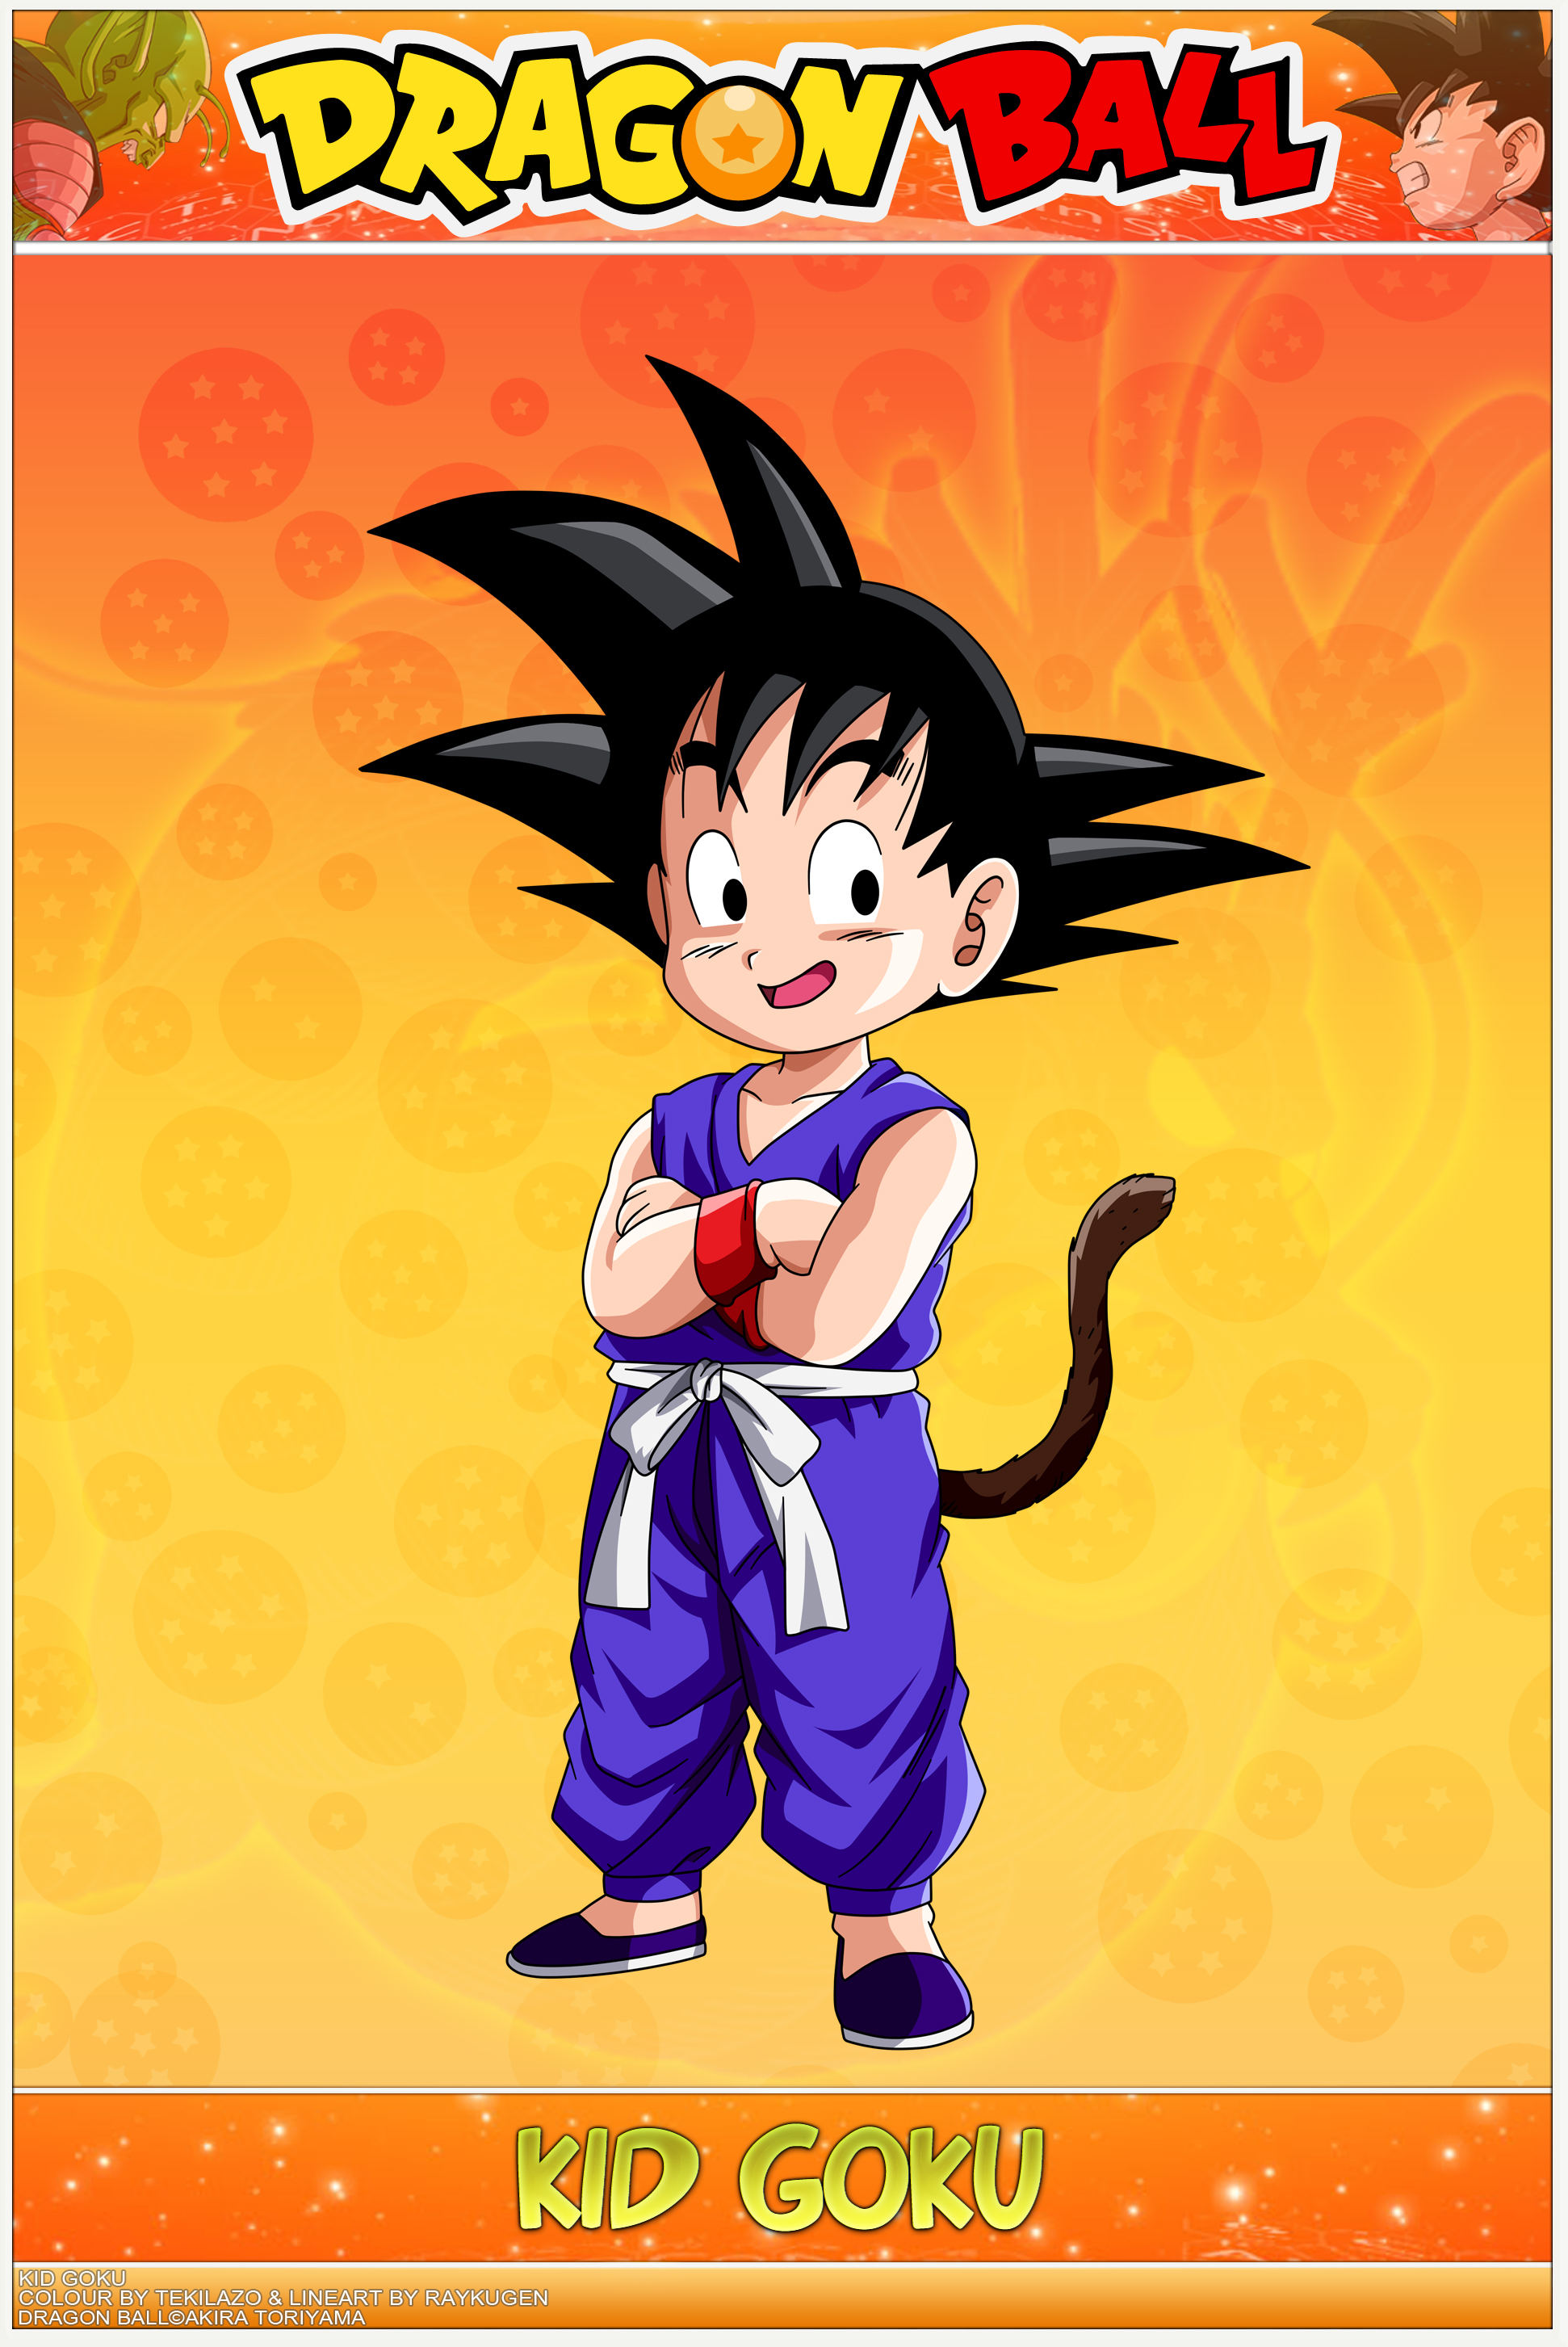 Dragon Ball - Kid Goku EPS by DBCProject on DeviantArt